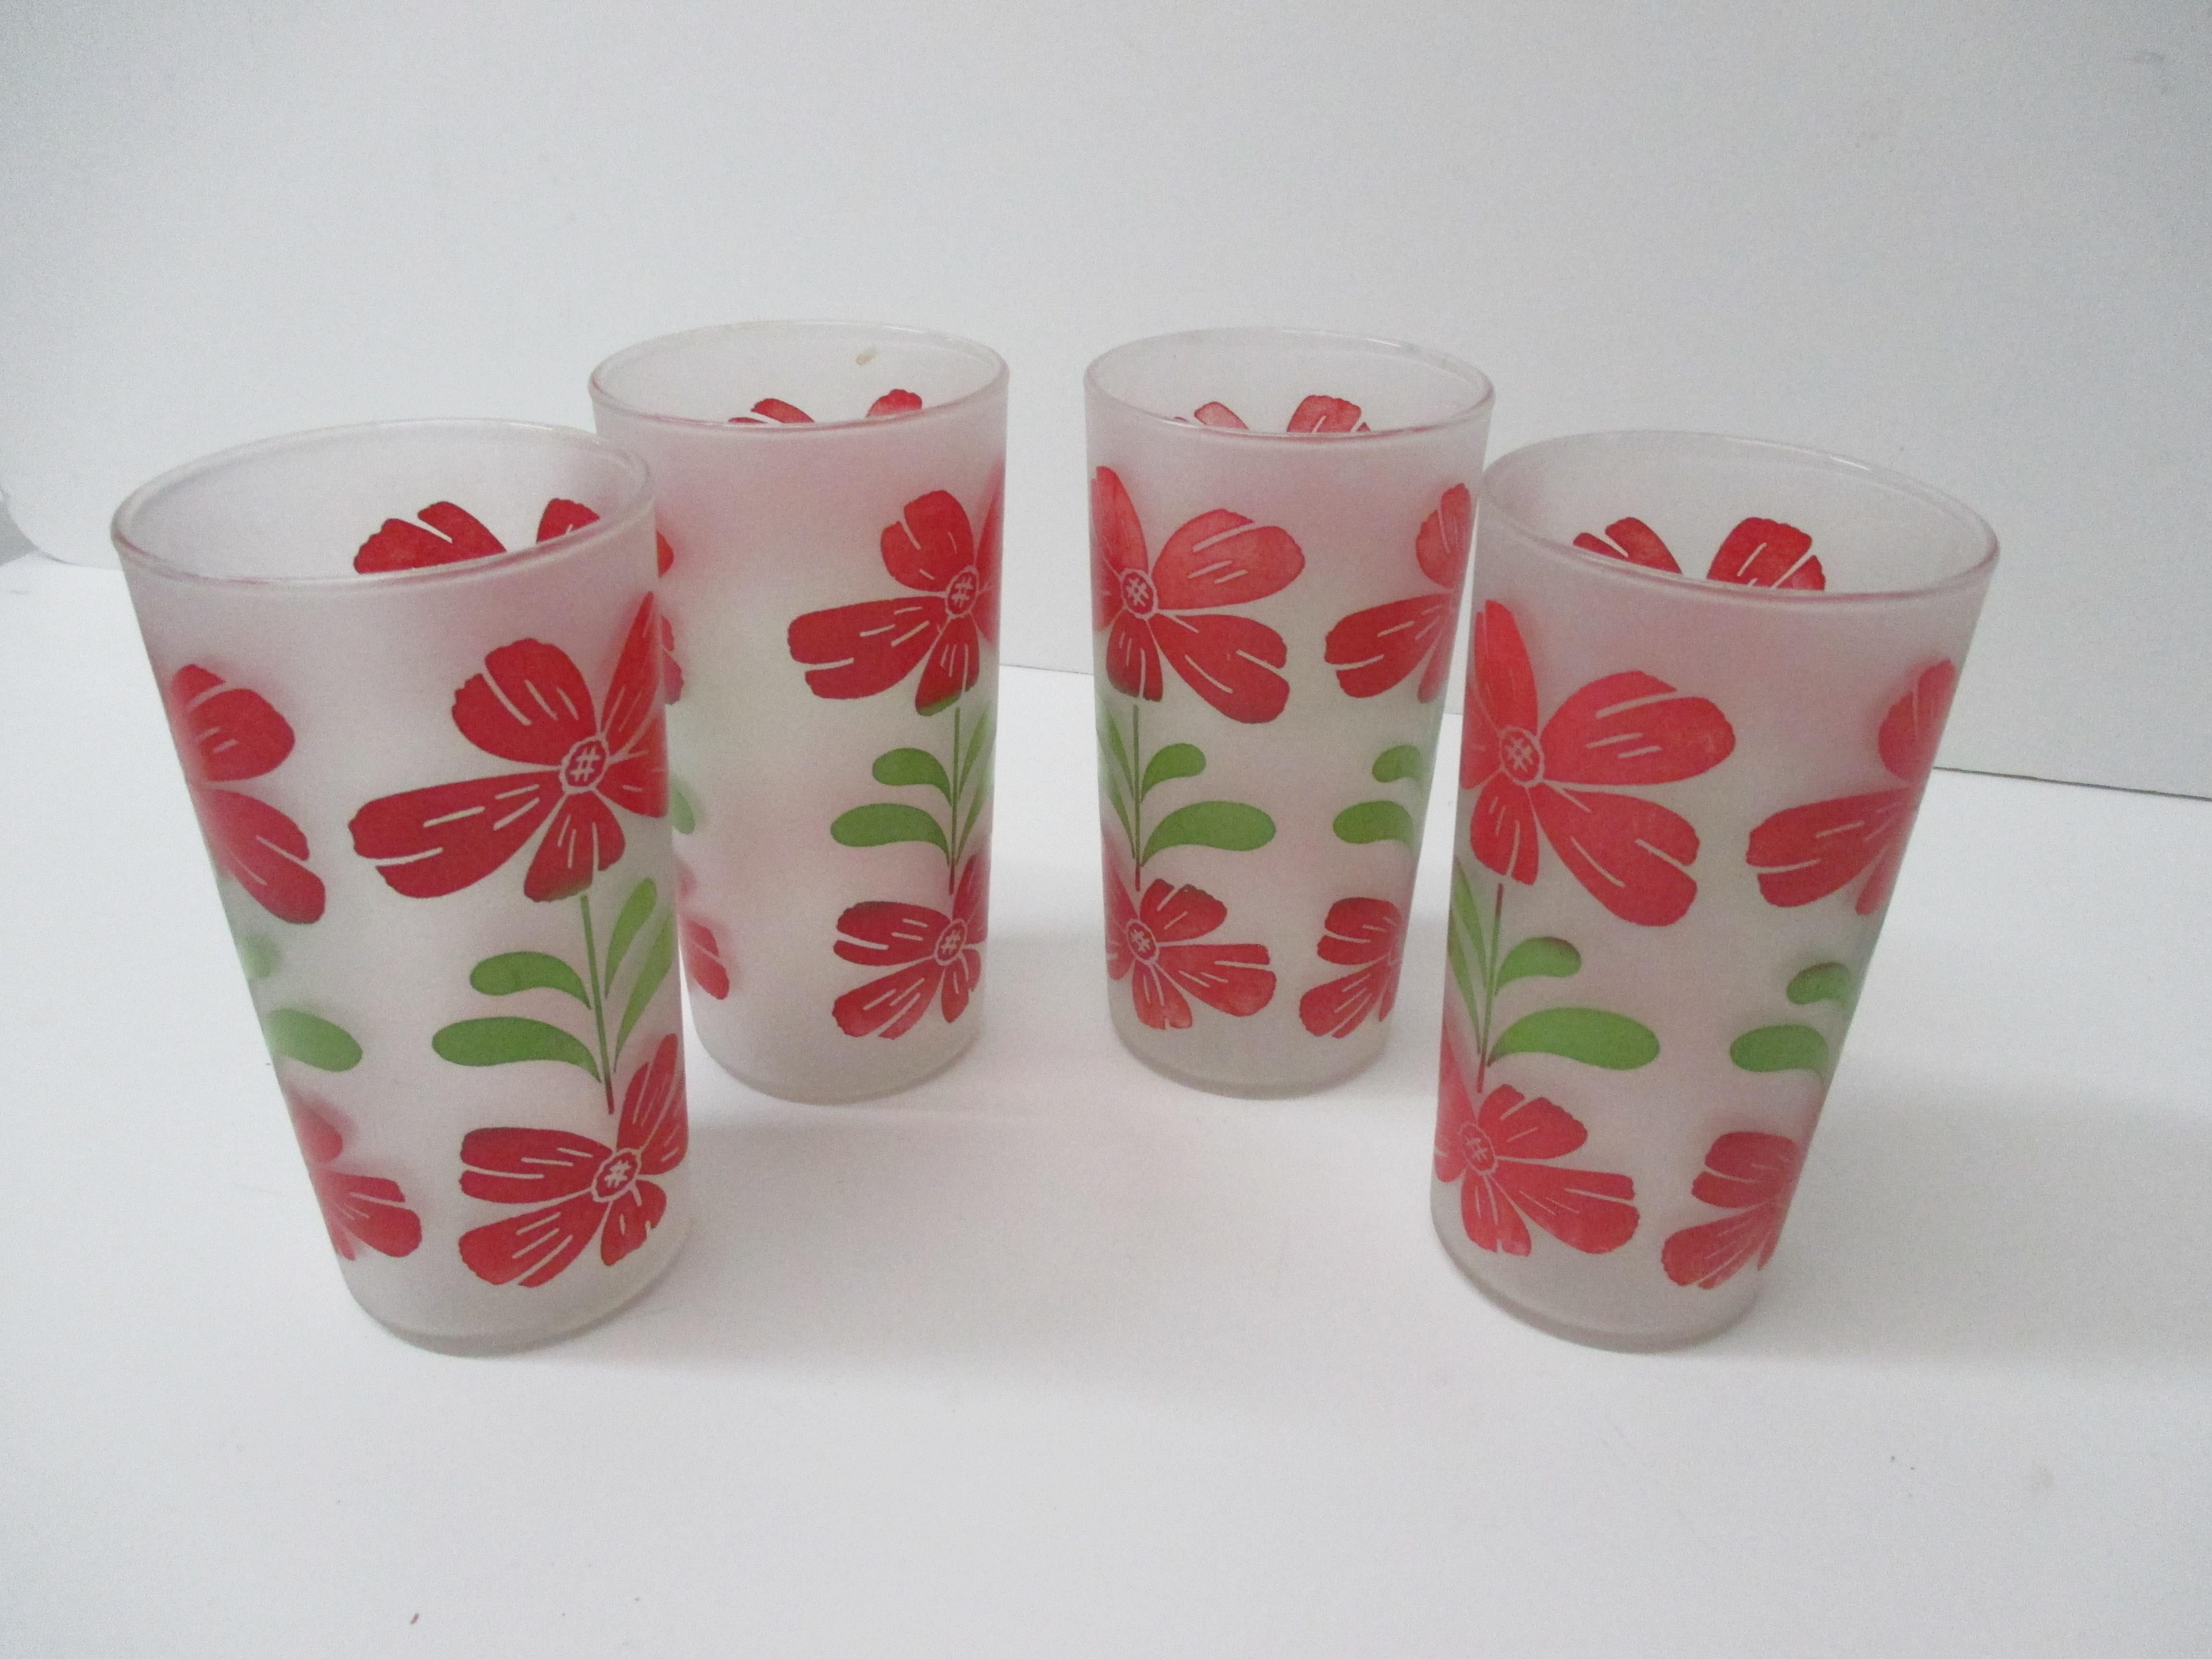 Vintage set of (4) frosted glass hand painted glasses.
Size: 5.5